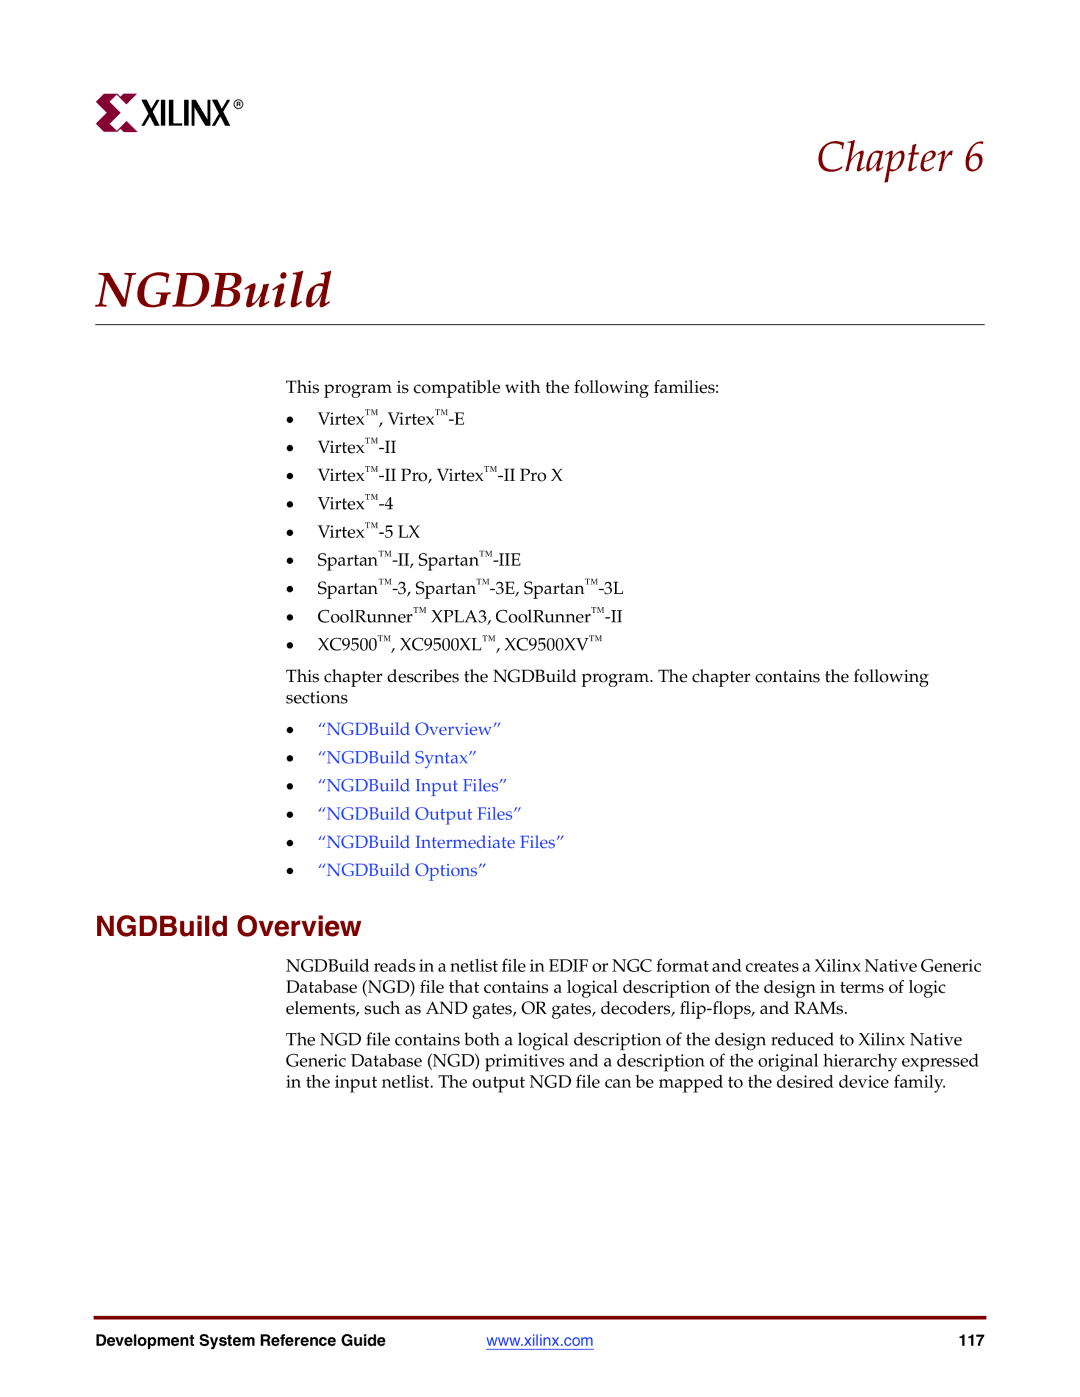 Xilinx 8.2i manual NGDBuild Overview 